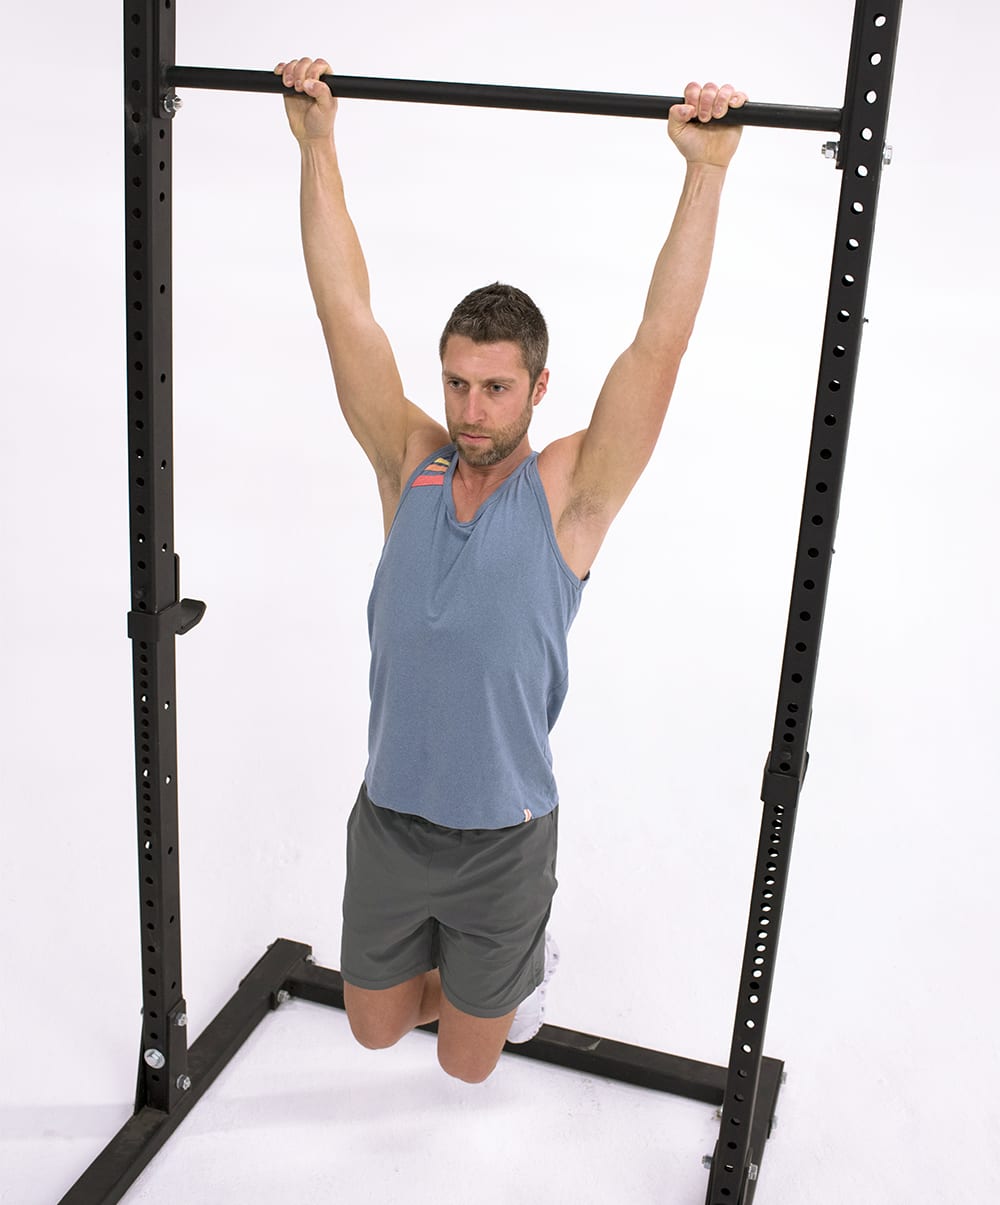 Man Does Scapular Retractions | Isometric Exercise